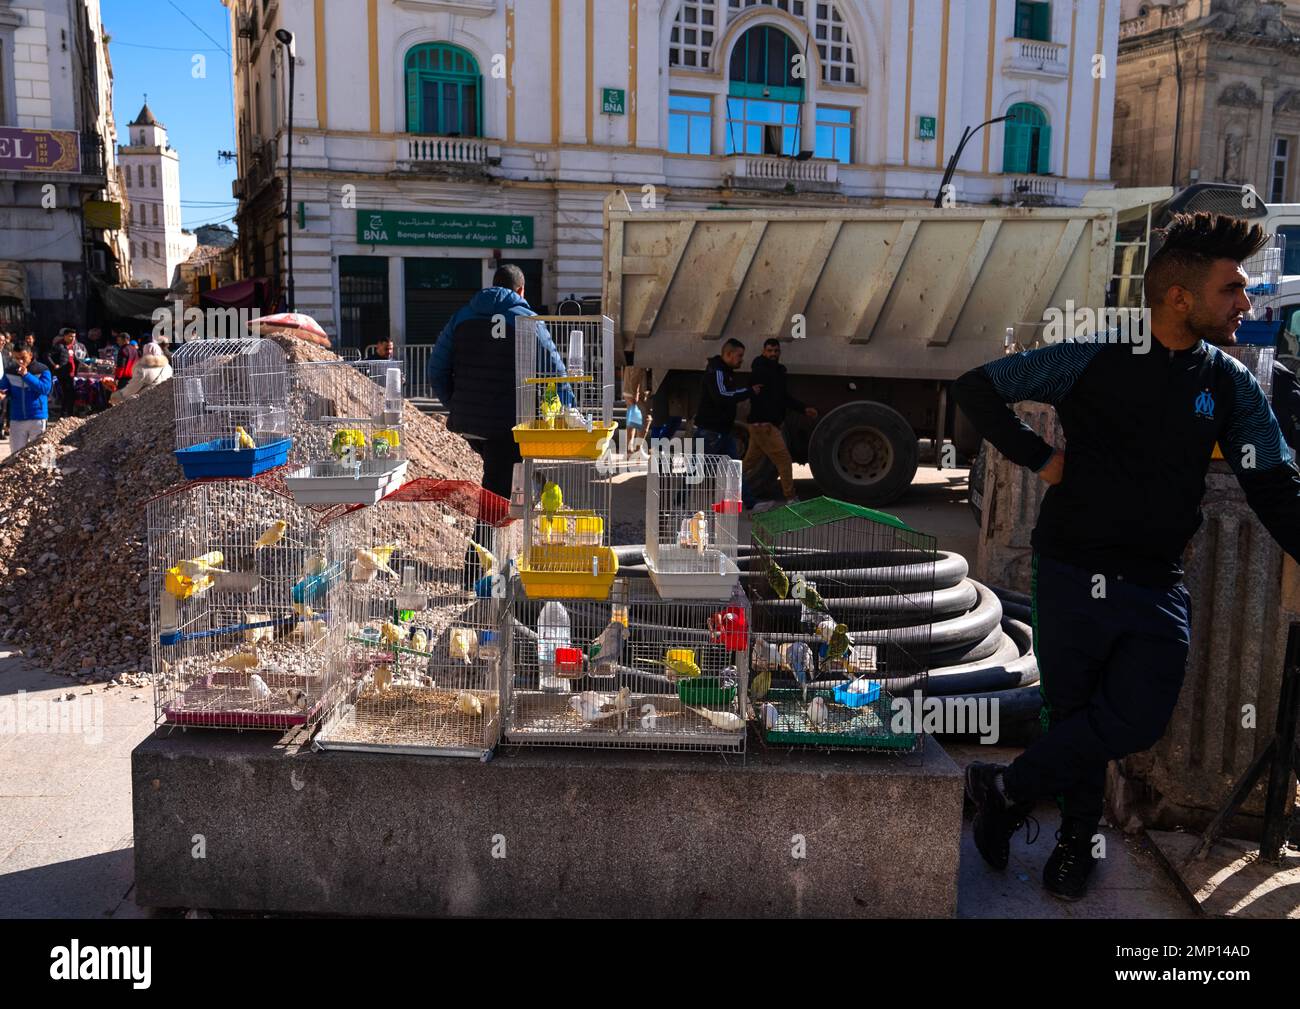 Algerian man selling parakeets in cages in the street, North Africa, Constantine, Algeria Stock Photo